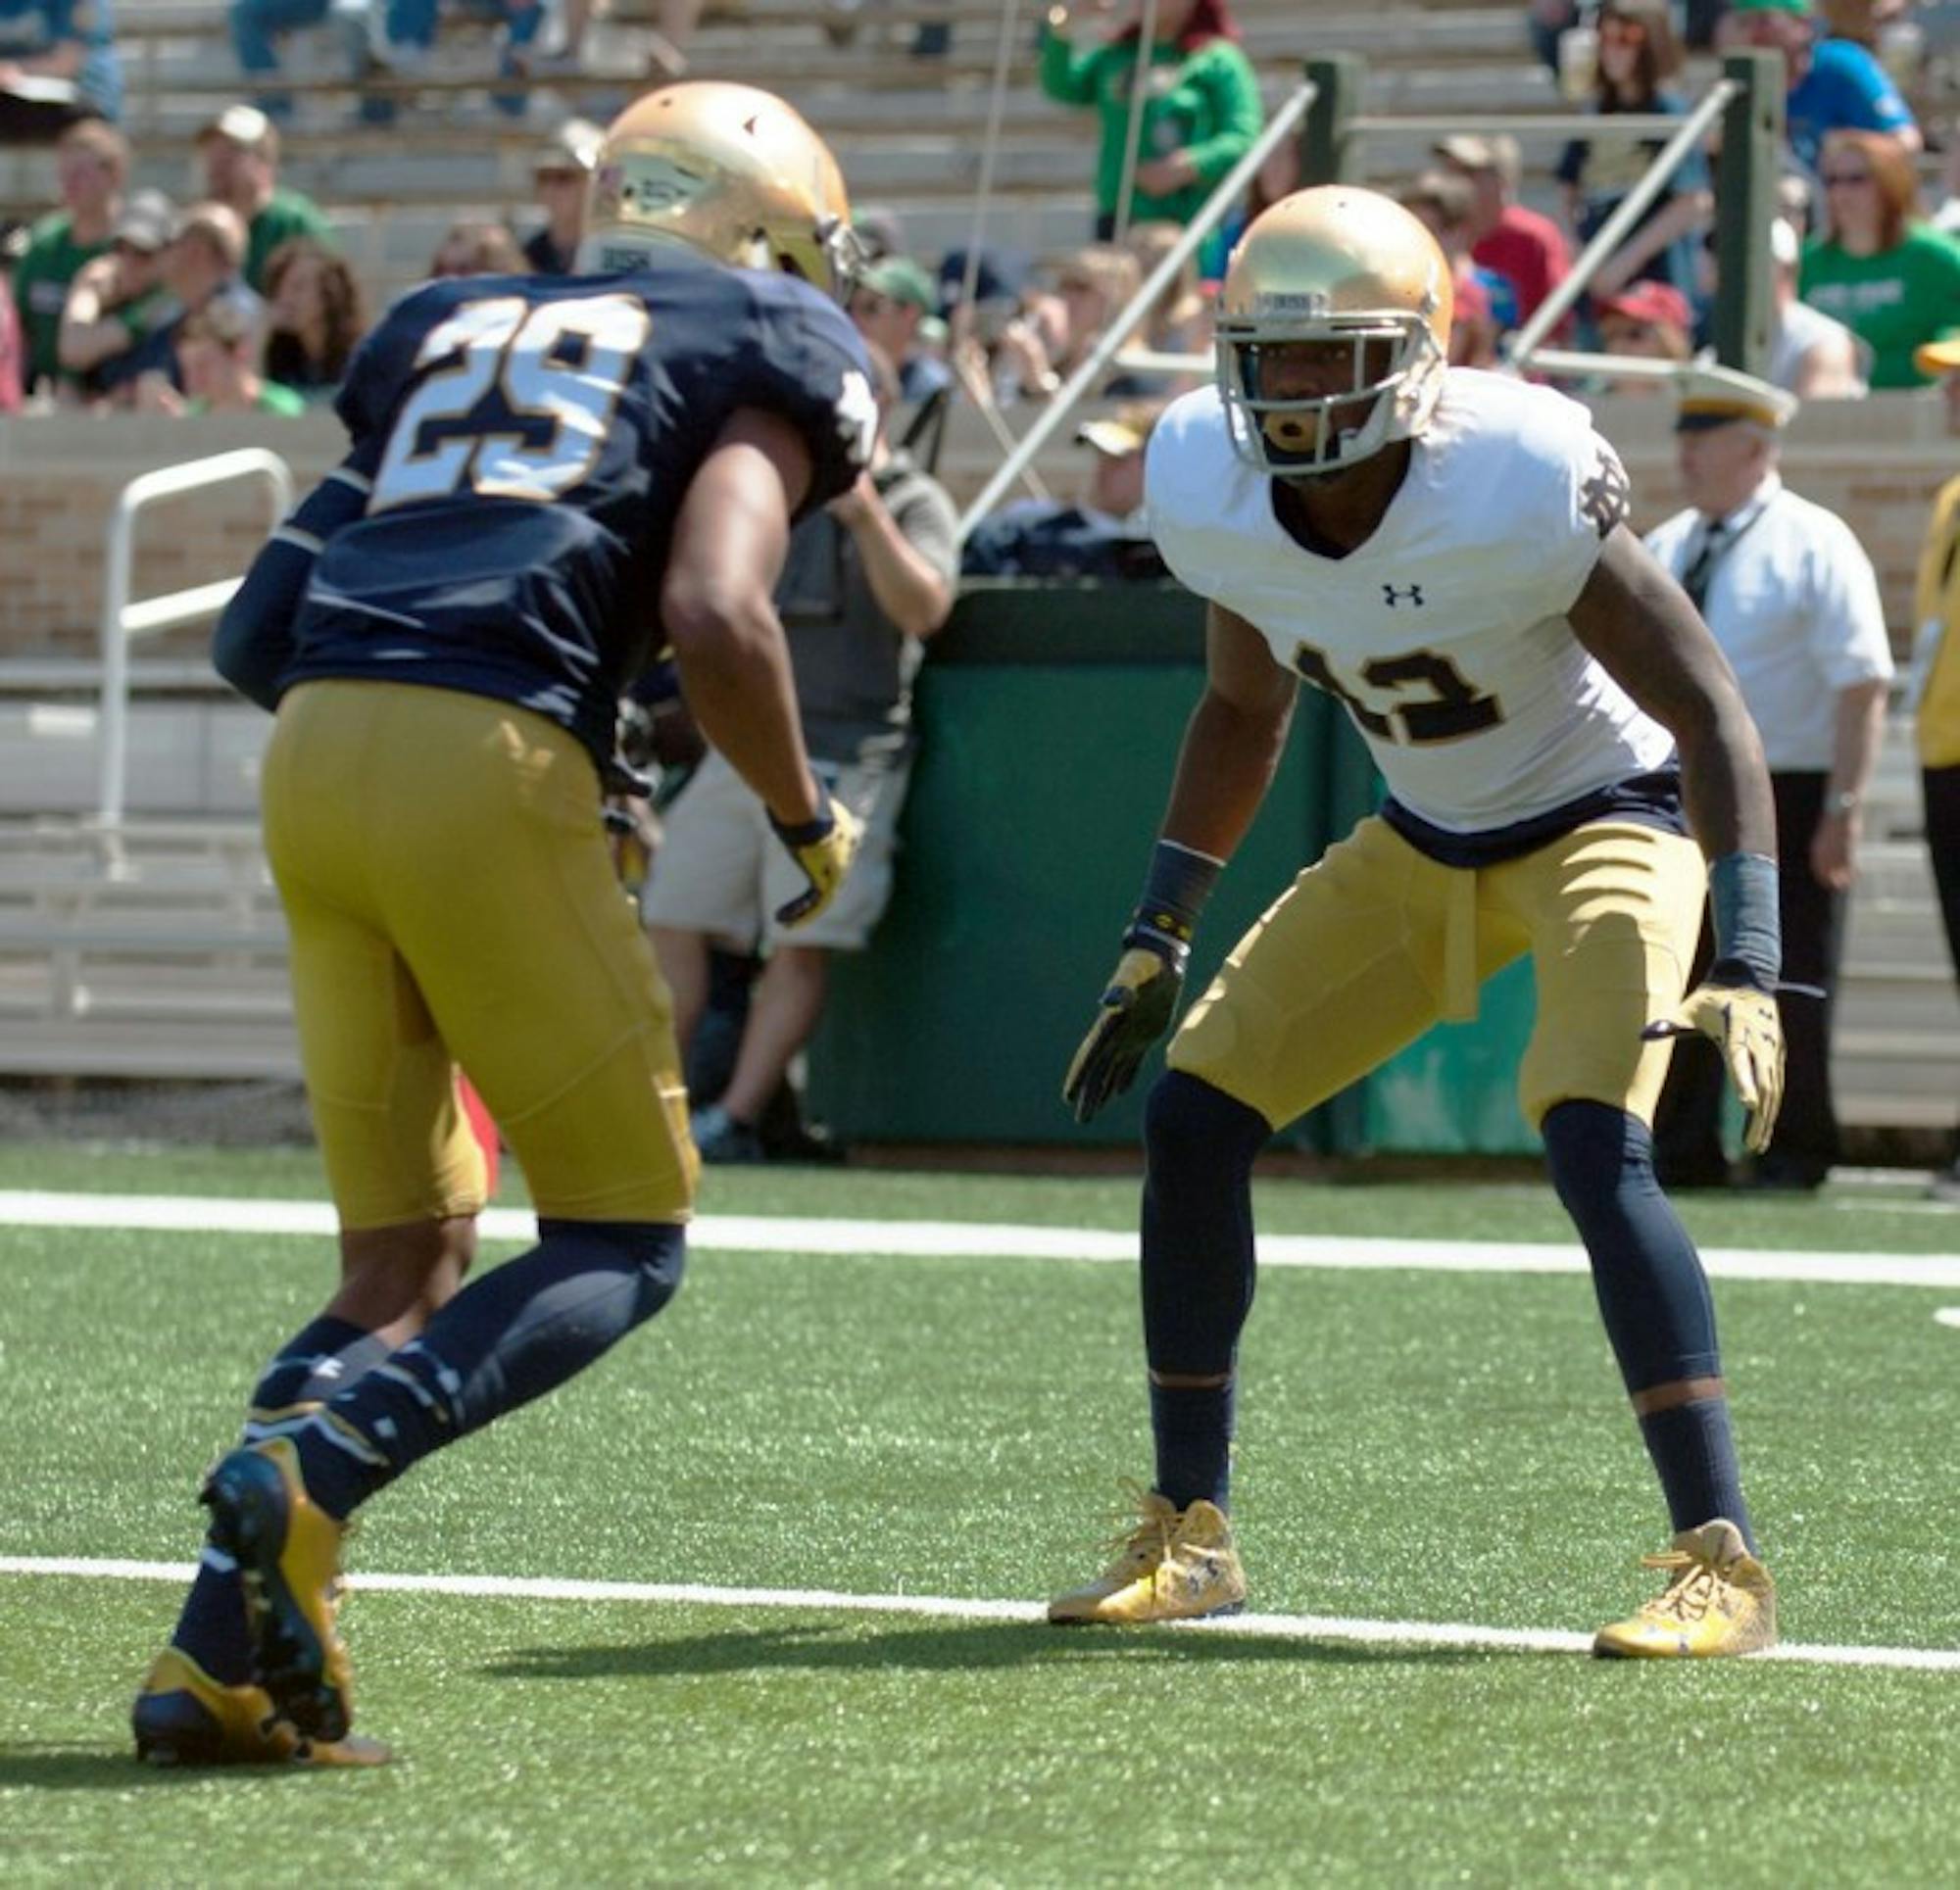 Irish senior Devin Butler lines up before a play during Notre Dame's Blue Gold Game on April 16 at Notre Dame Stadium. Butler has been indefinitely dismissed from the team.